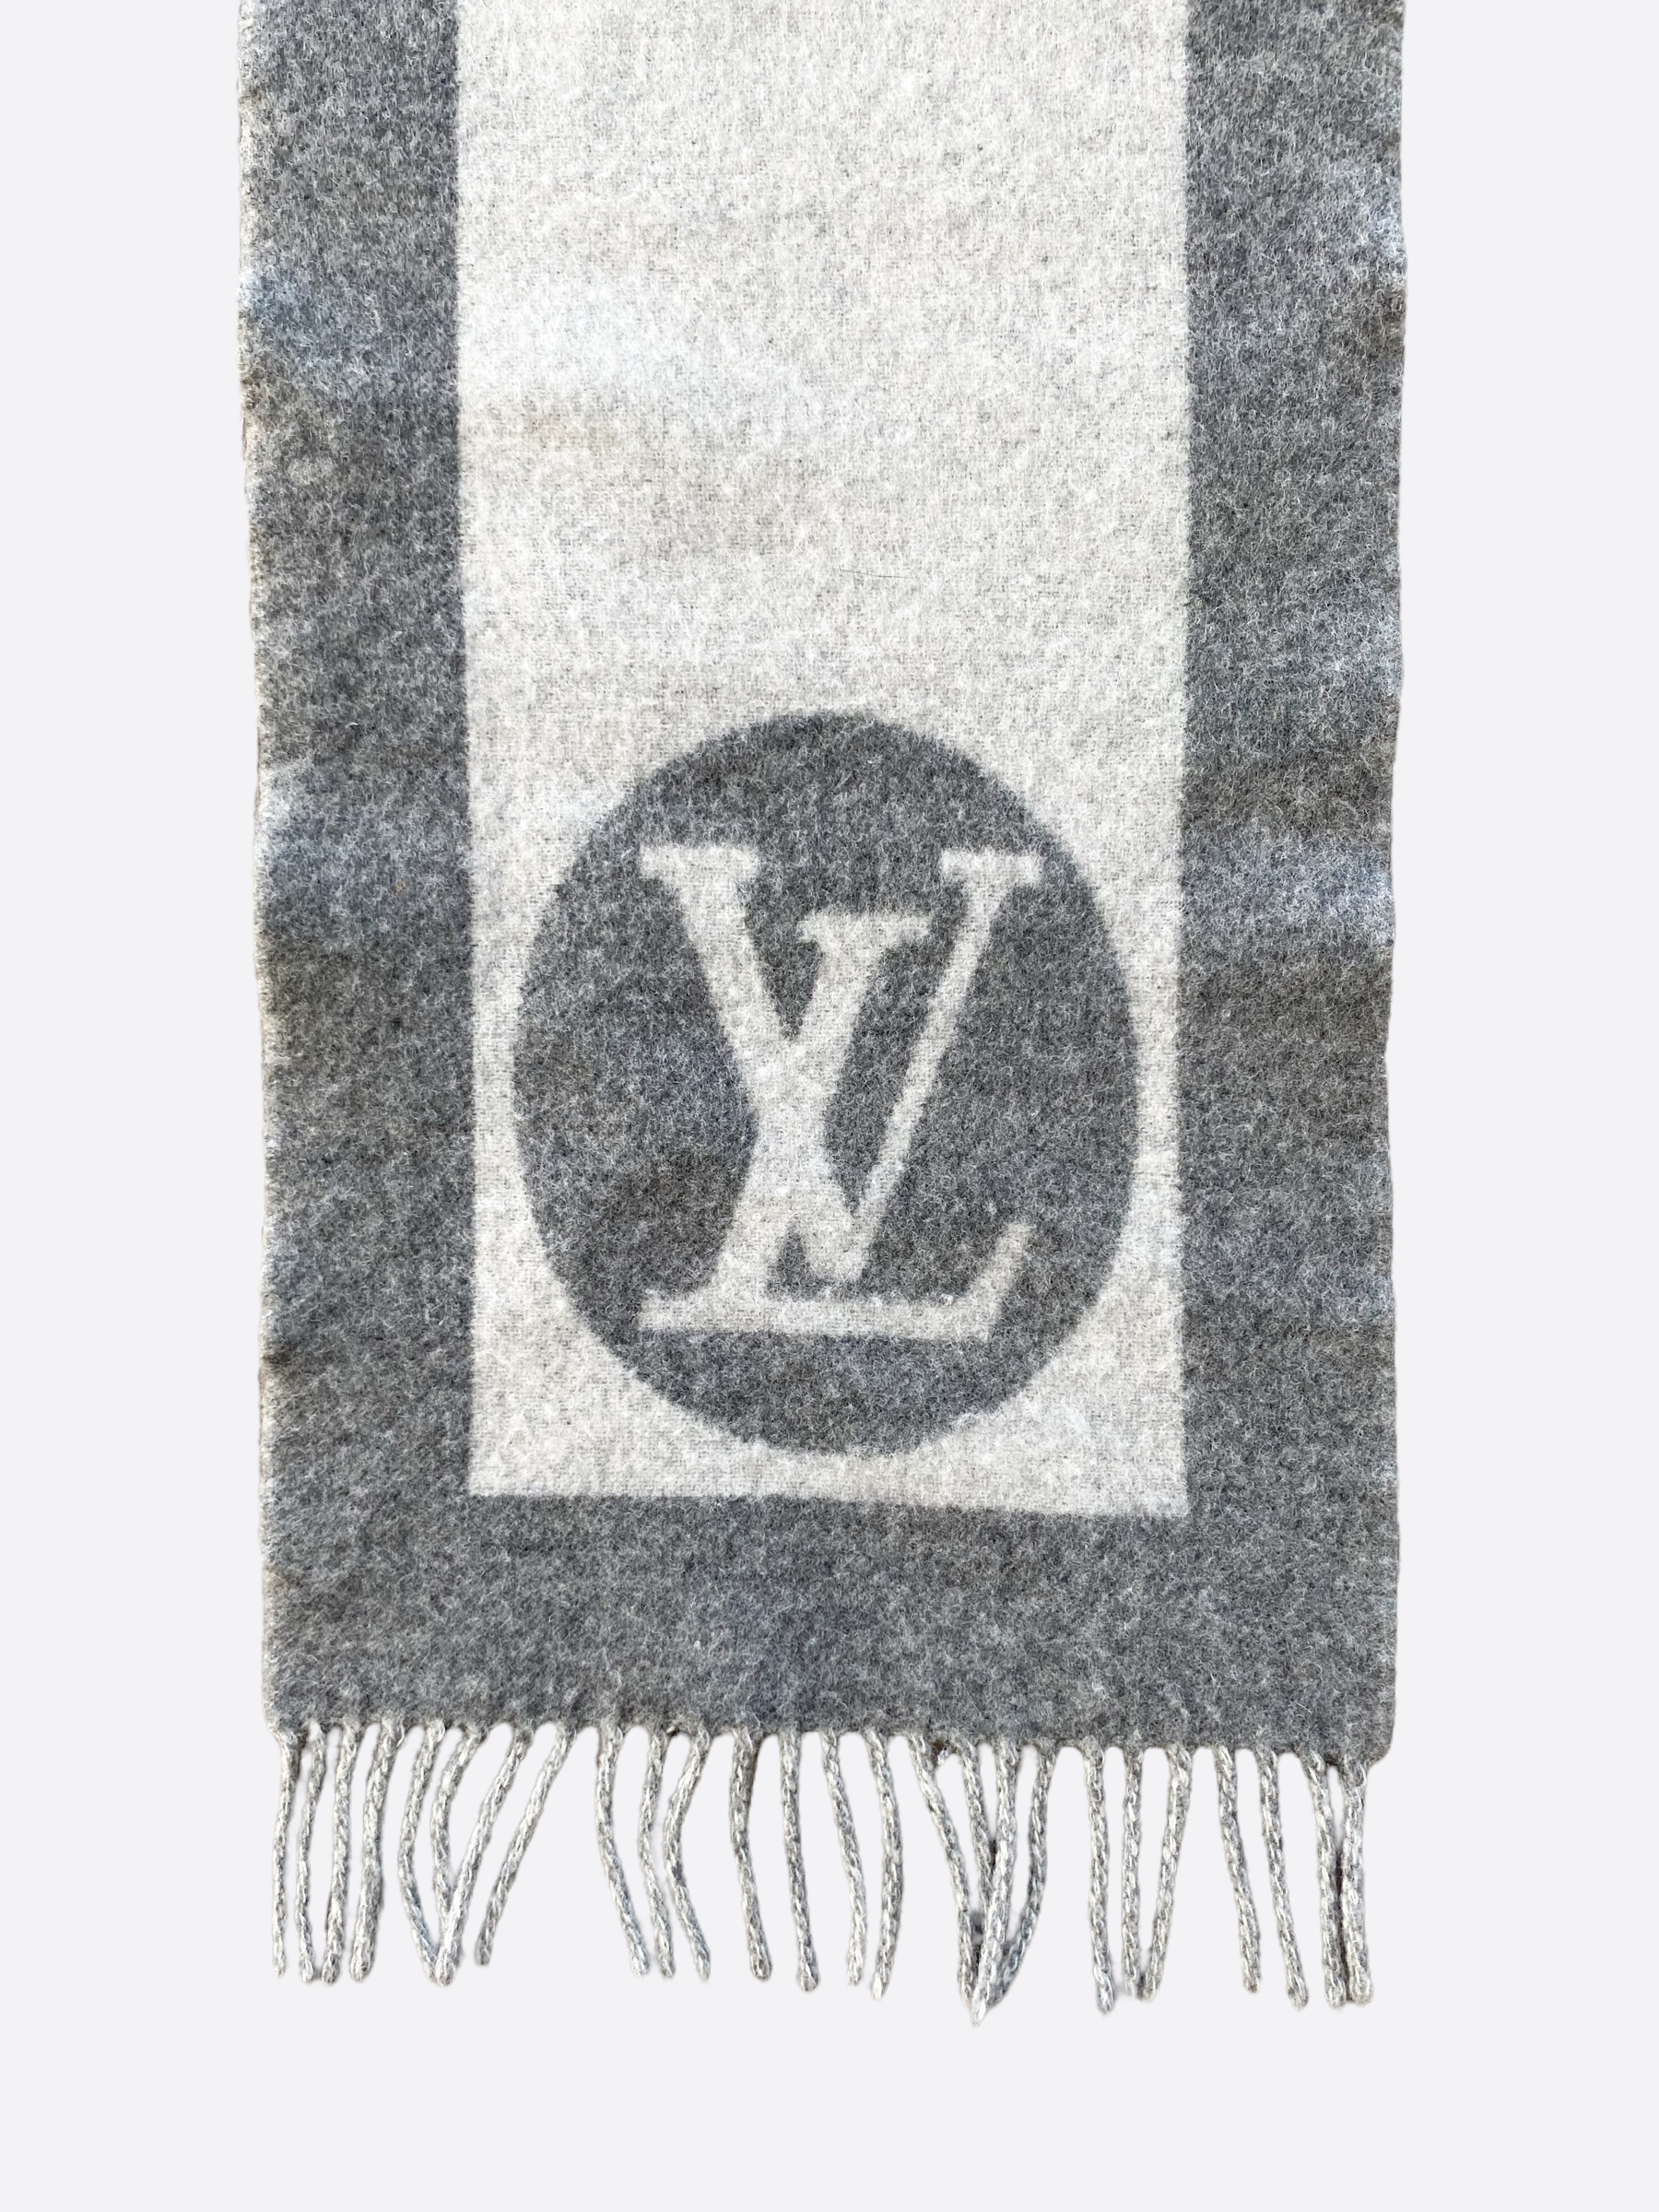 Shop Louis Vuitton Cardiff scarf (M70484, M70482) by トモポエム